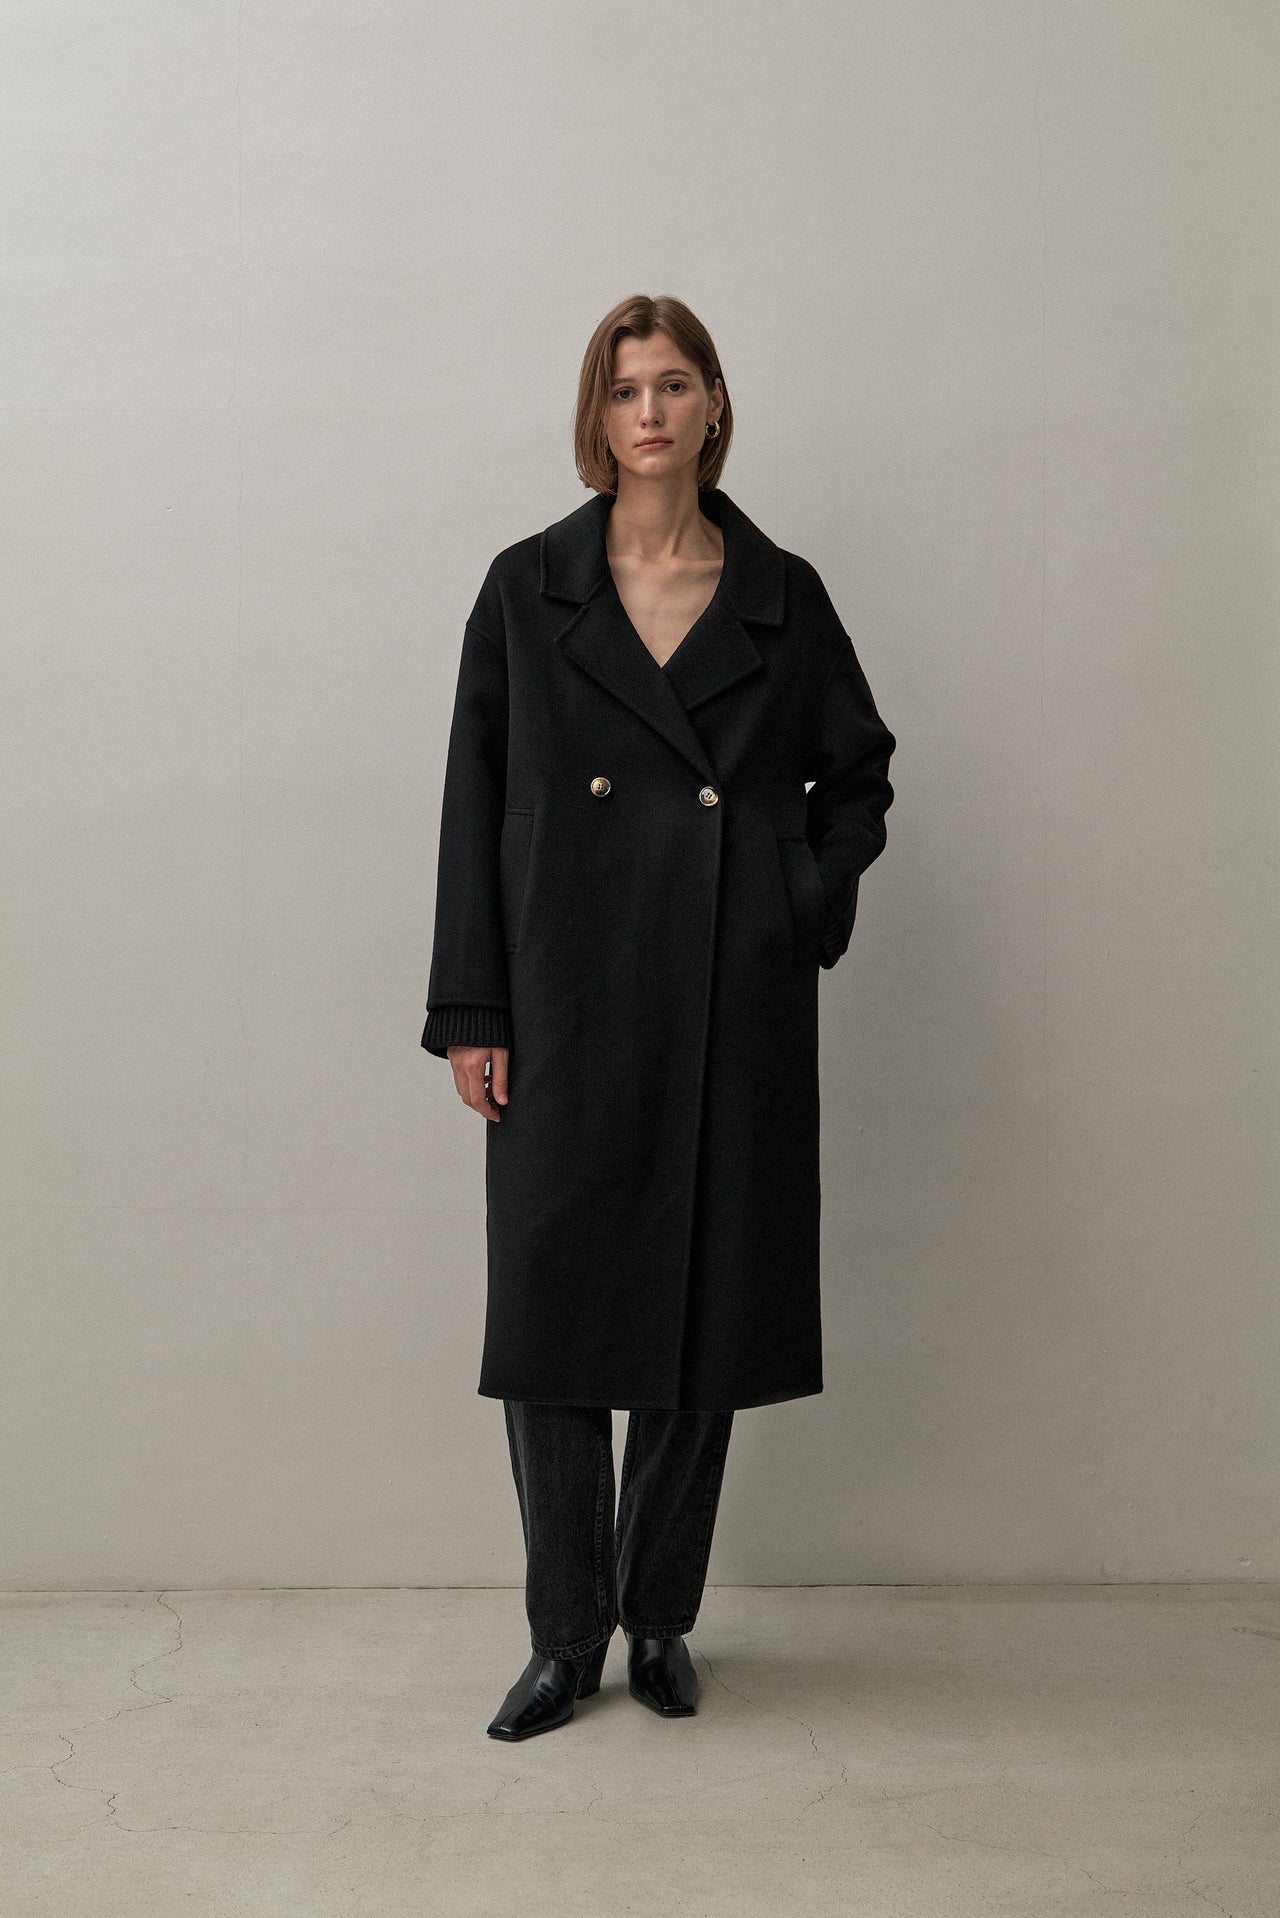 THE LONDON COAT – THE CURATED